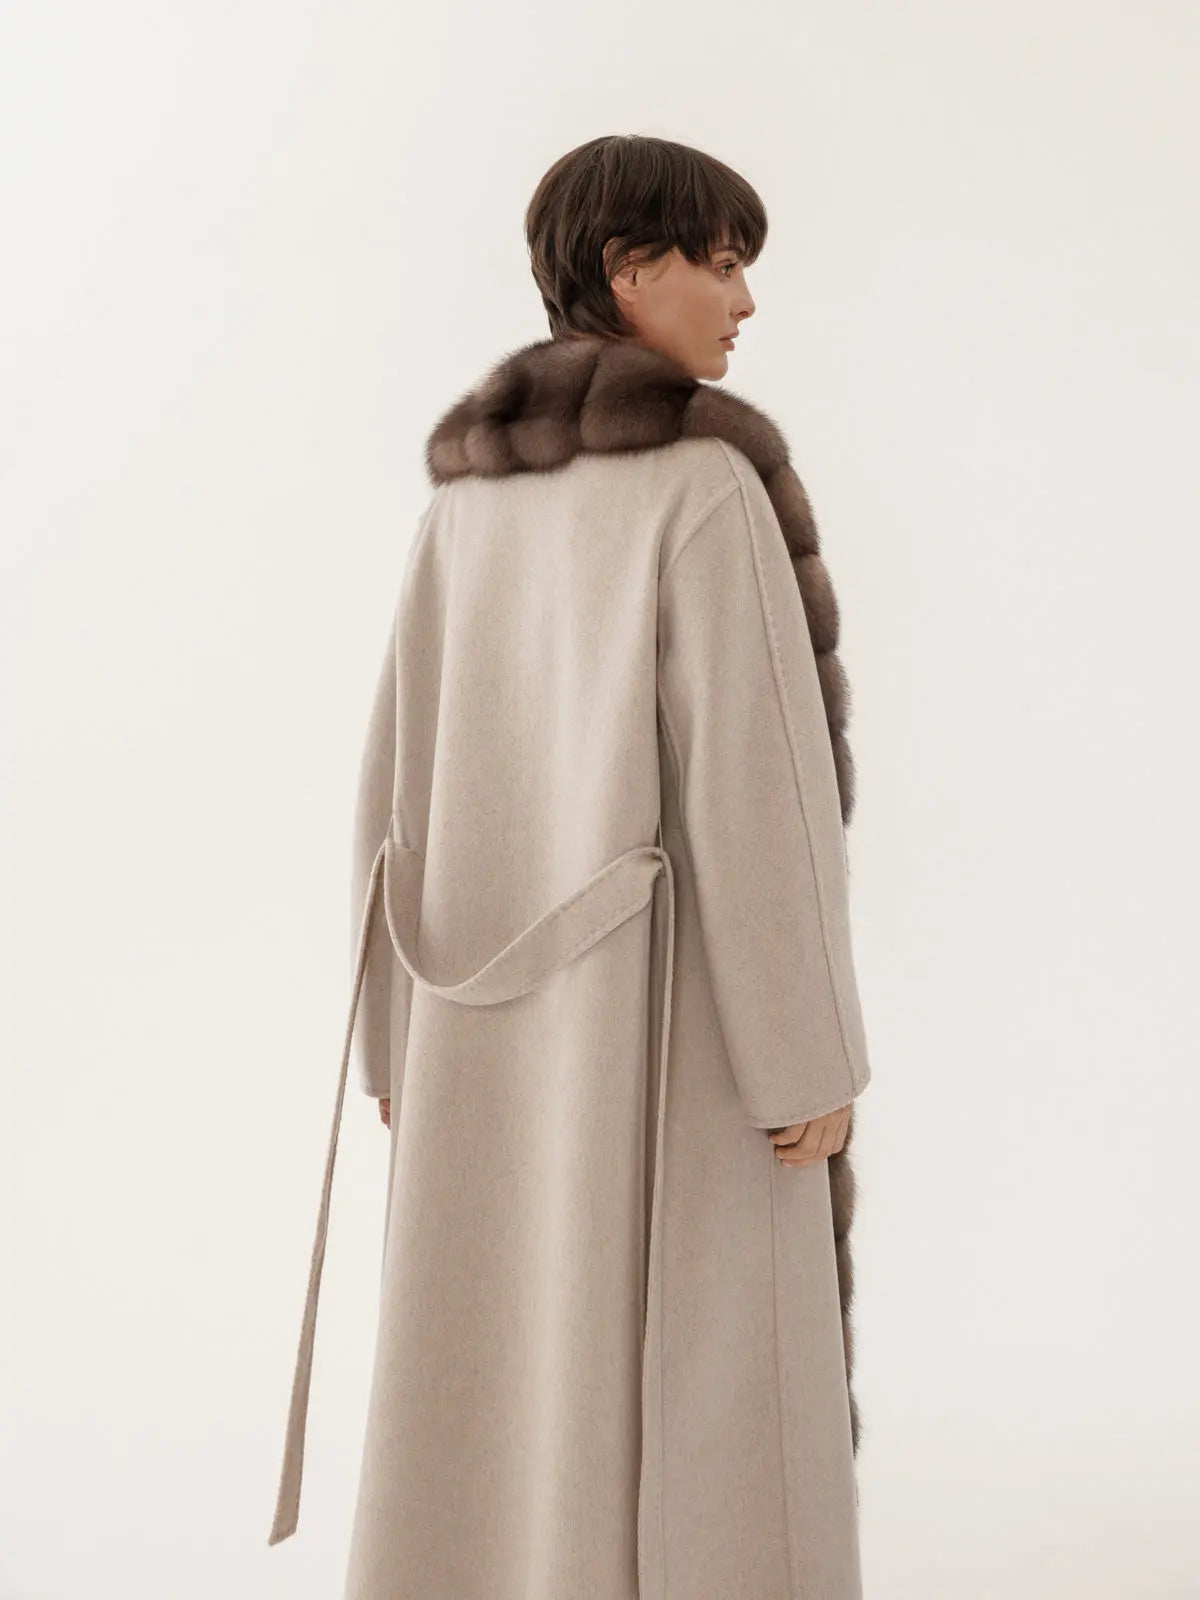 Coat of cashmere in olive tone with natural fur shawl collar